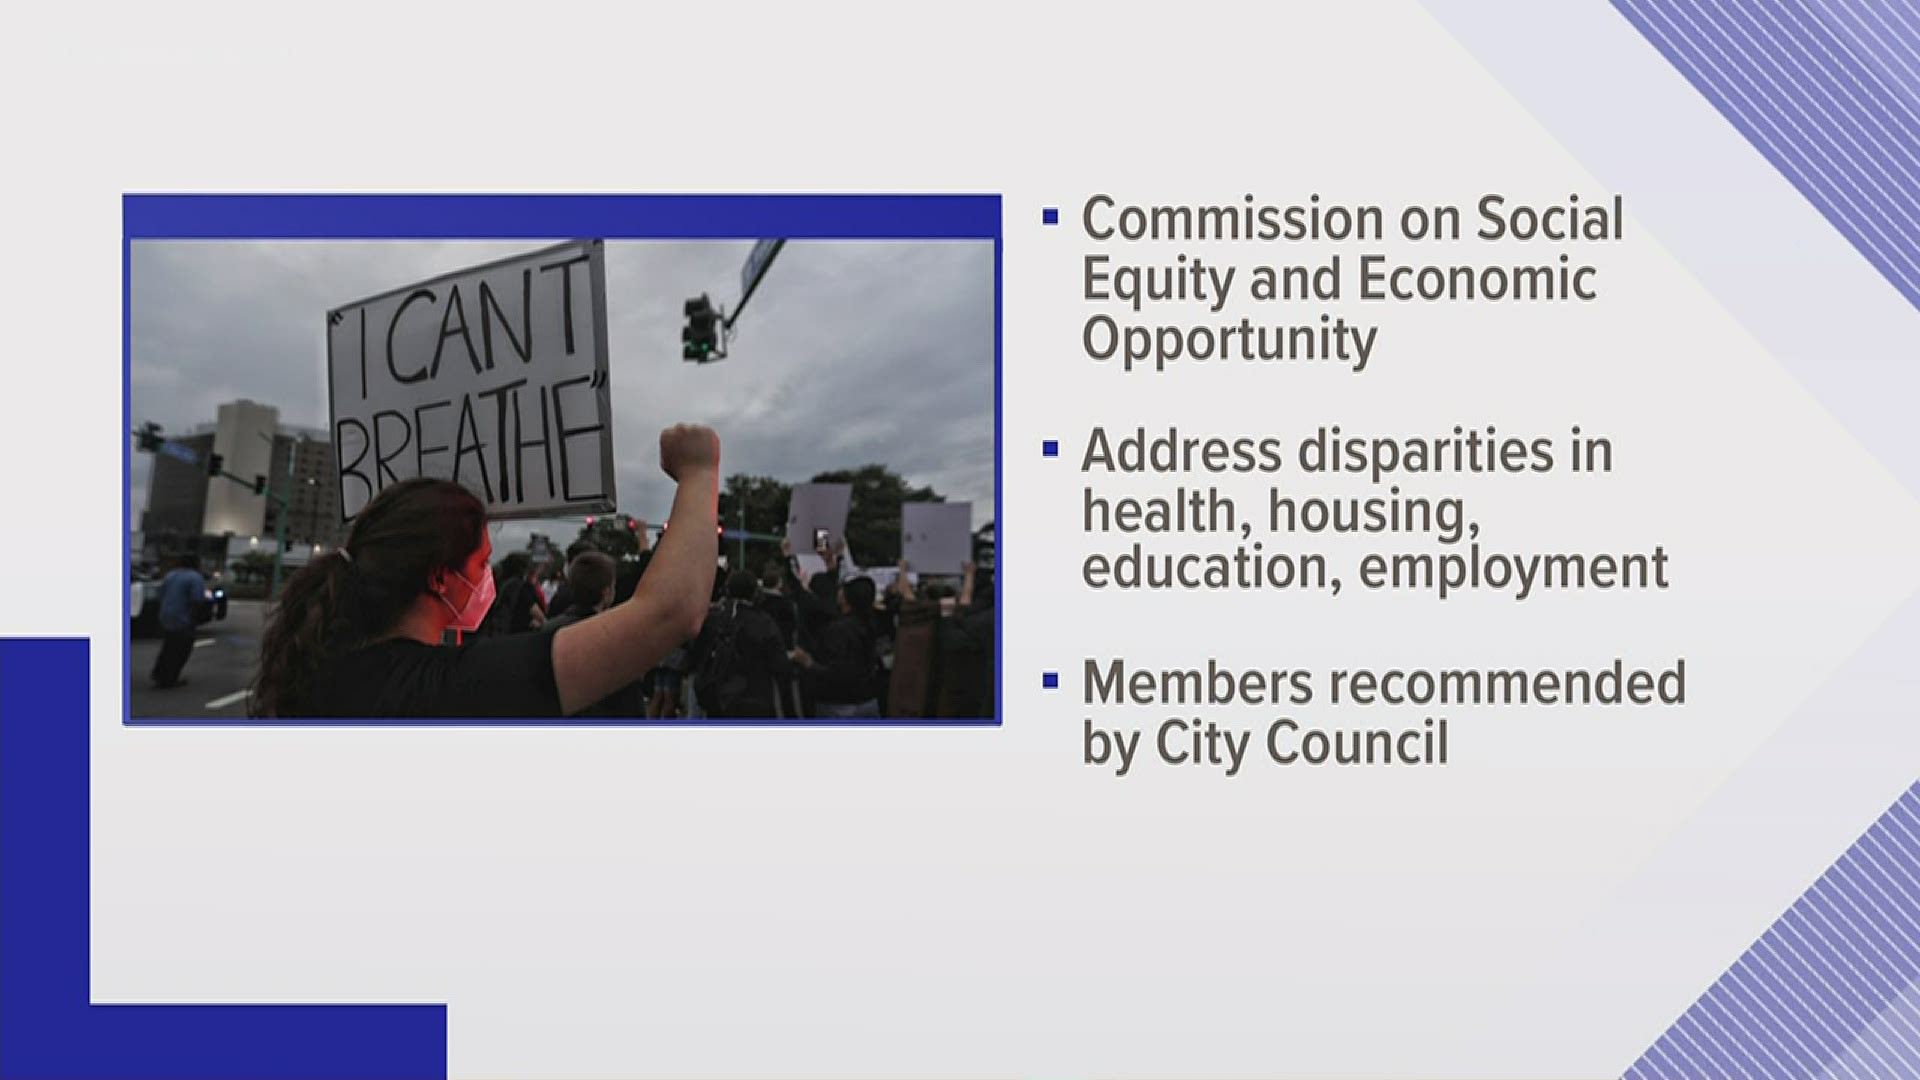 The "Commission on Social Equity and Economic Opportunity" will address historical and current disparities in health, housing, education, and employment.